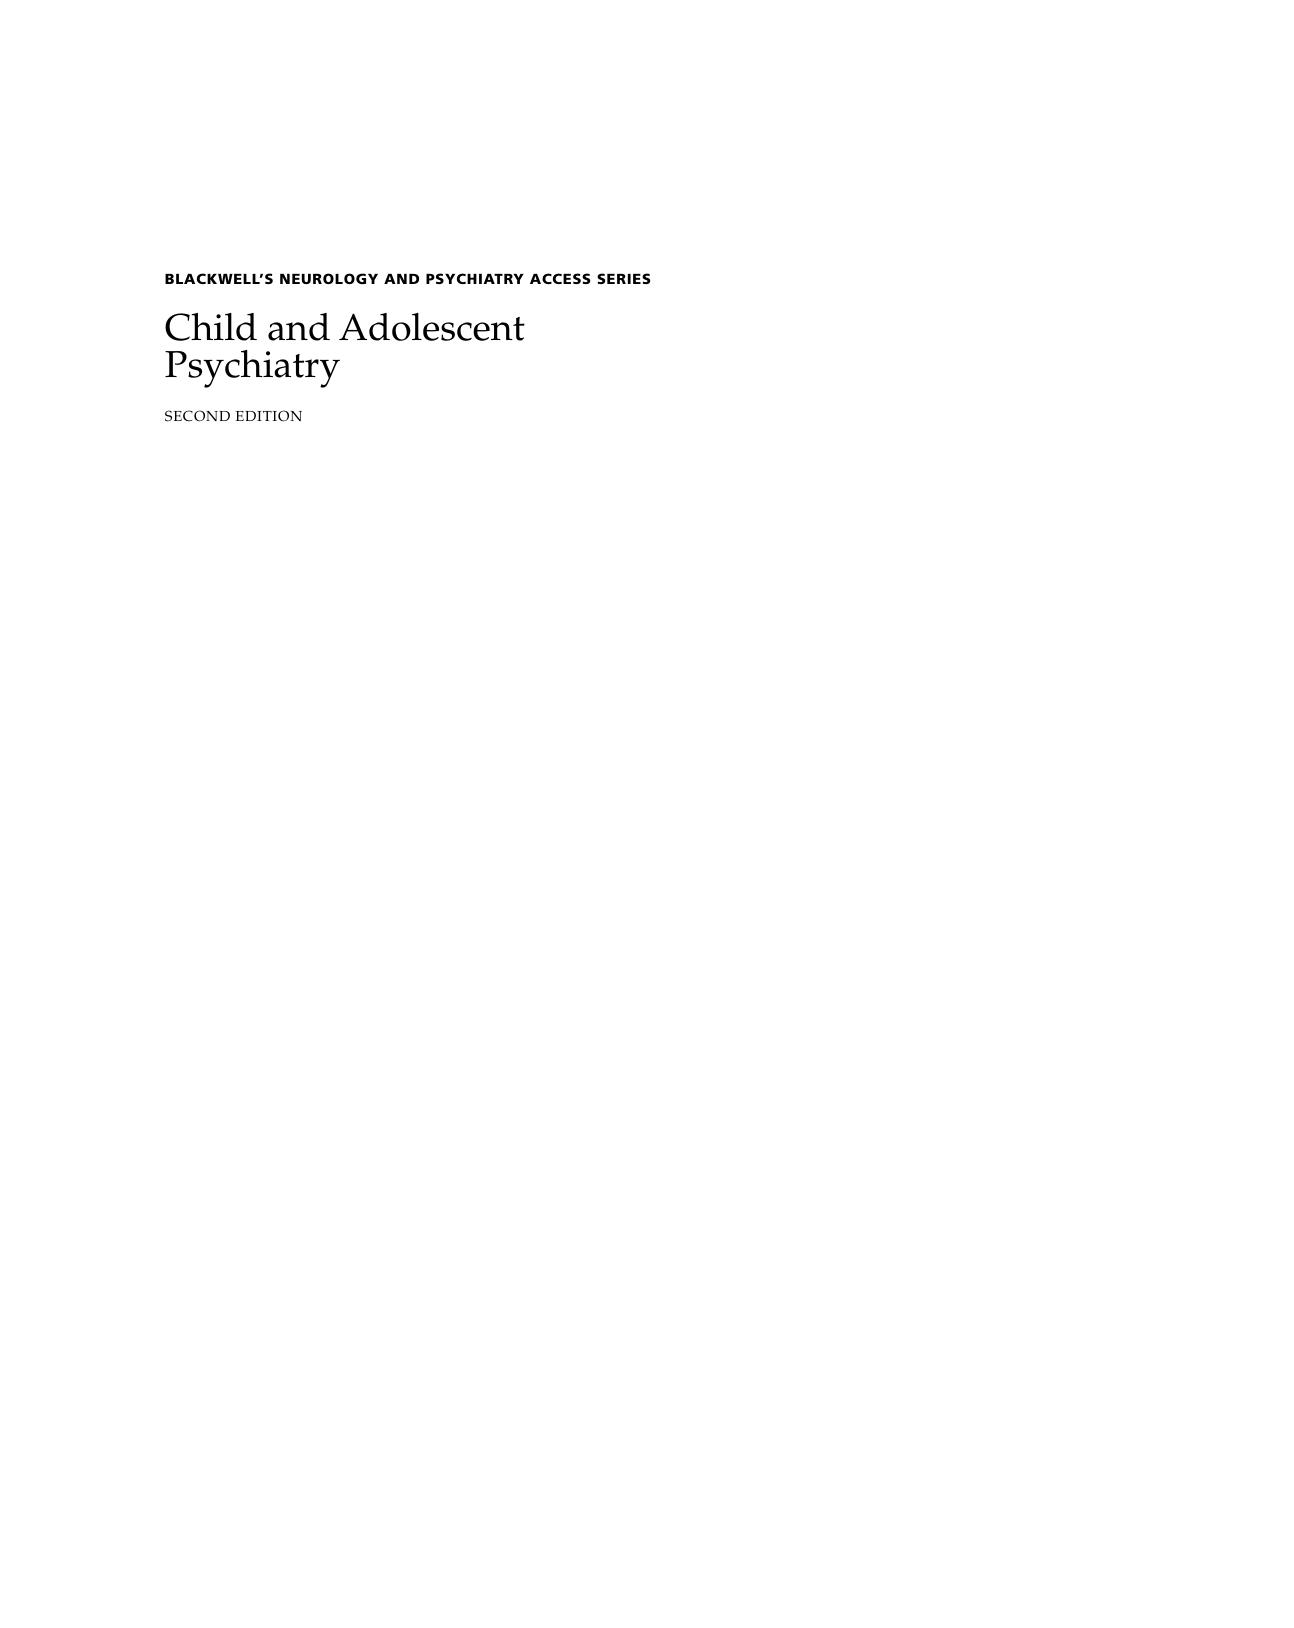 Child and Adolescent Psychiatry  Blackwell's Neurology and Psychiatry Access Series (Access) 2nd ed 2005